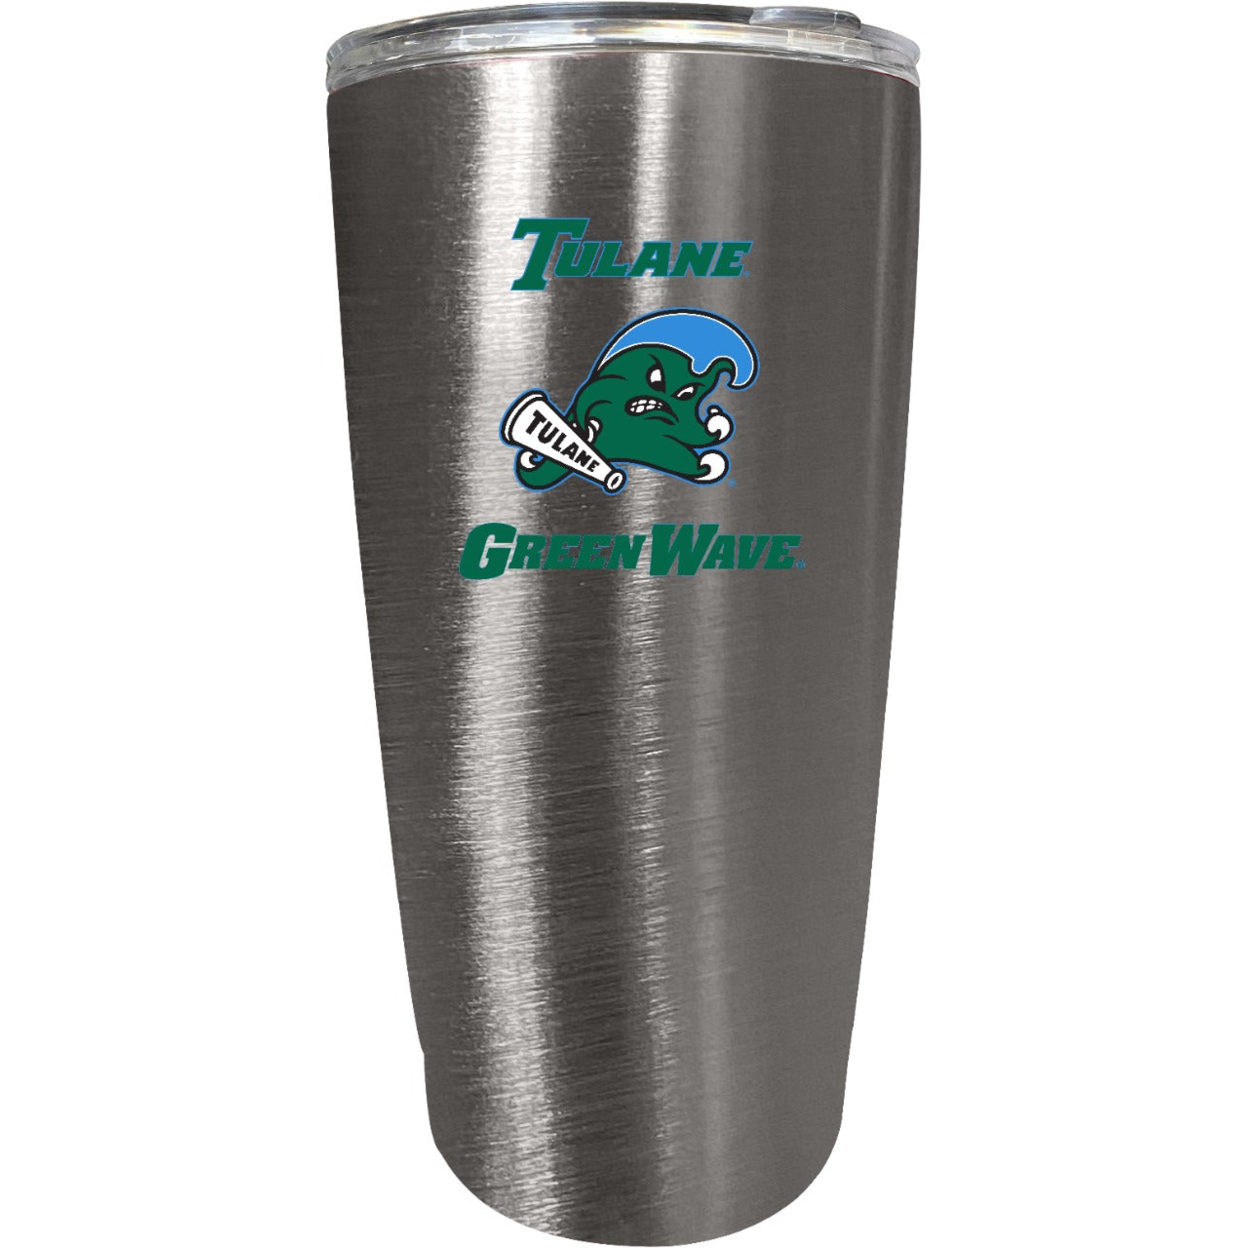 Tulane University Green Wave 16 Oz Insulated Stainless Steel Tumbler Colorless